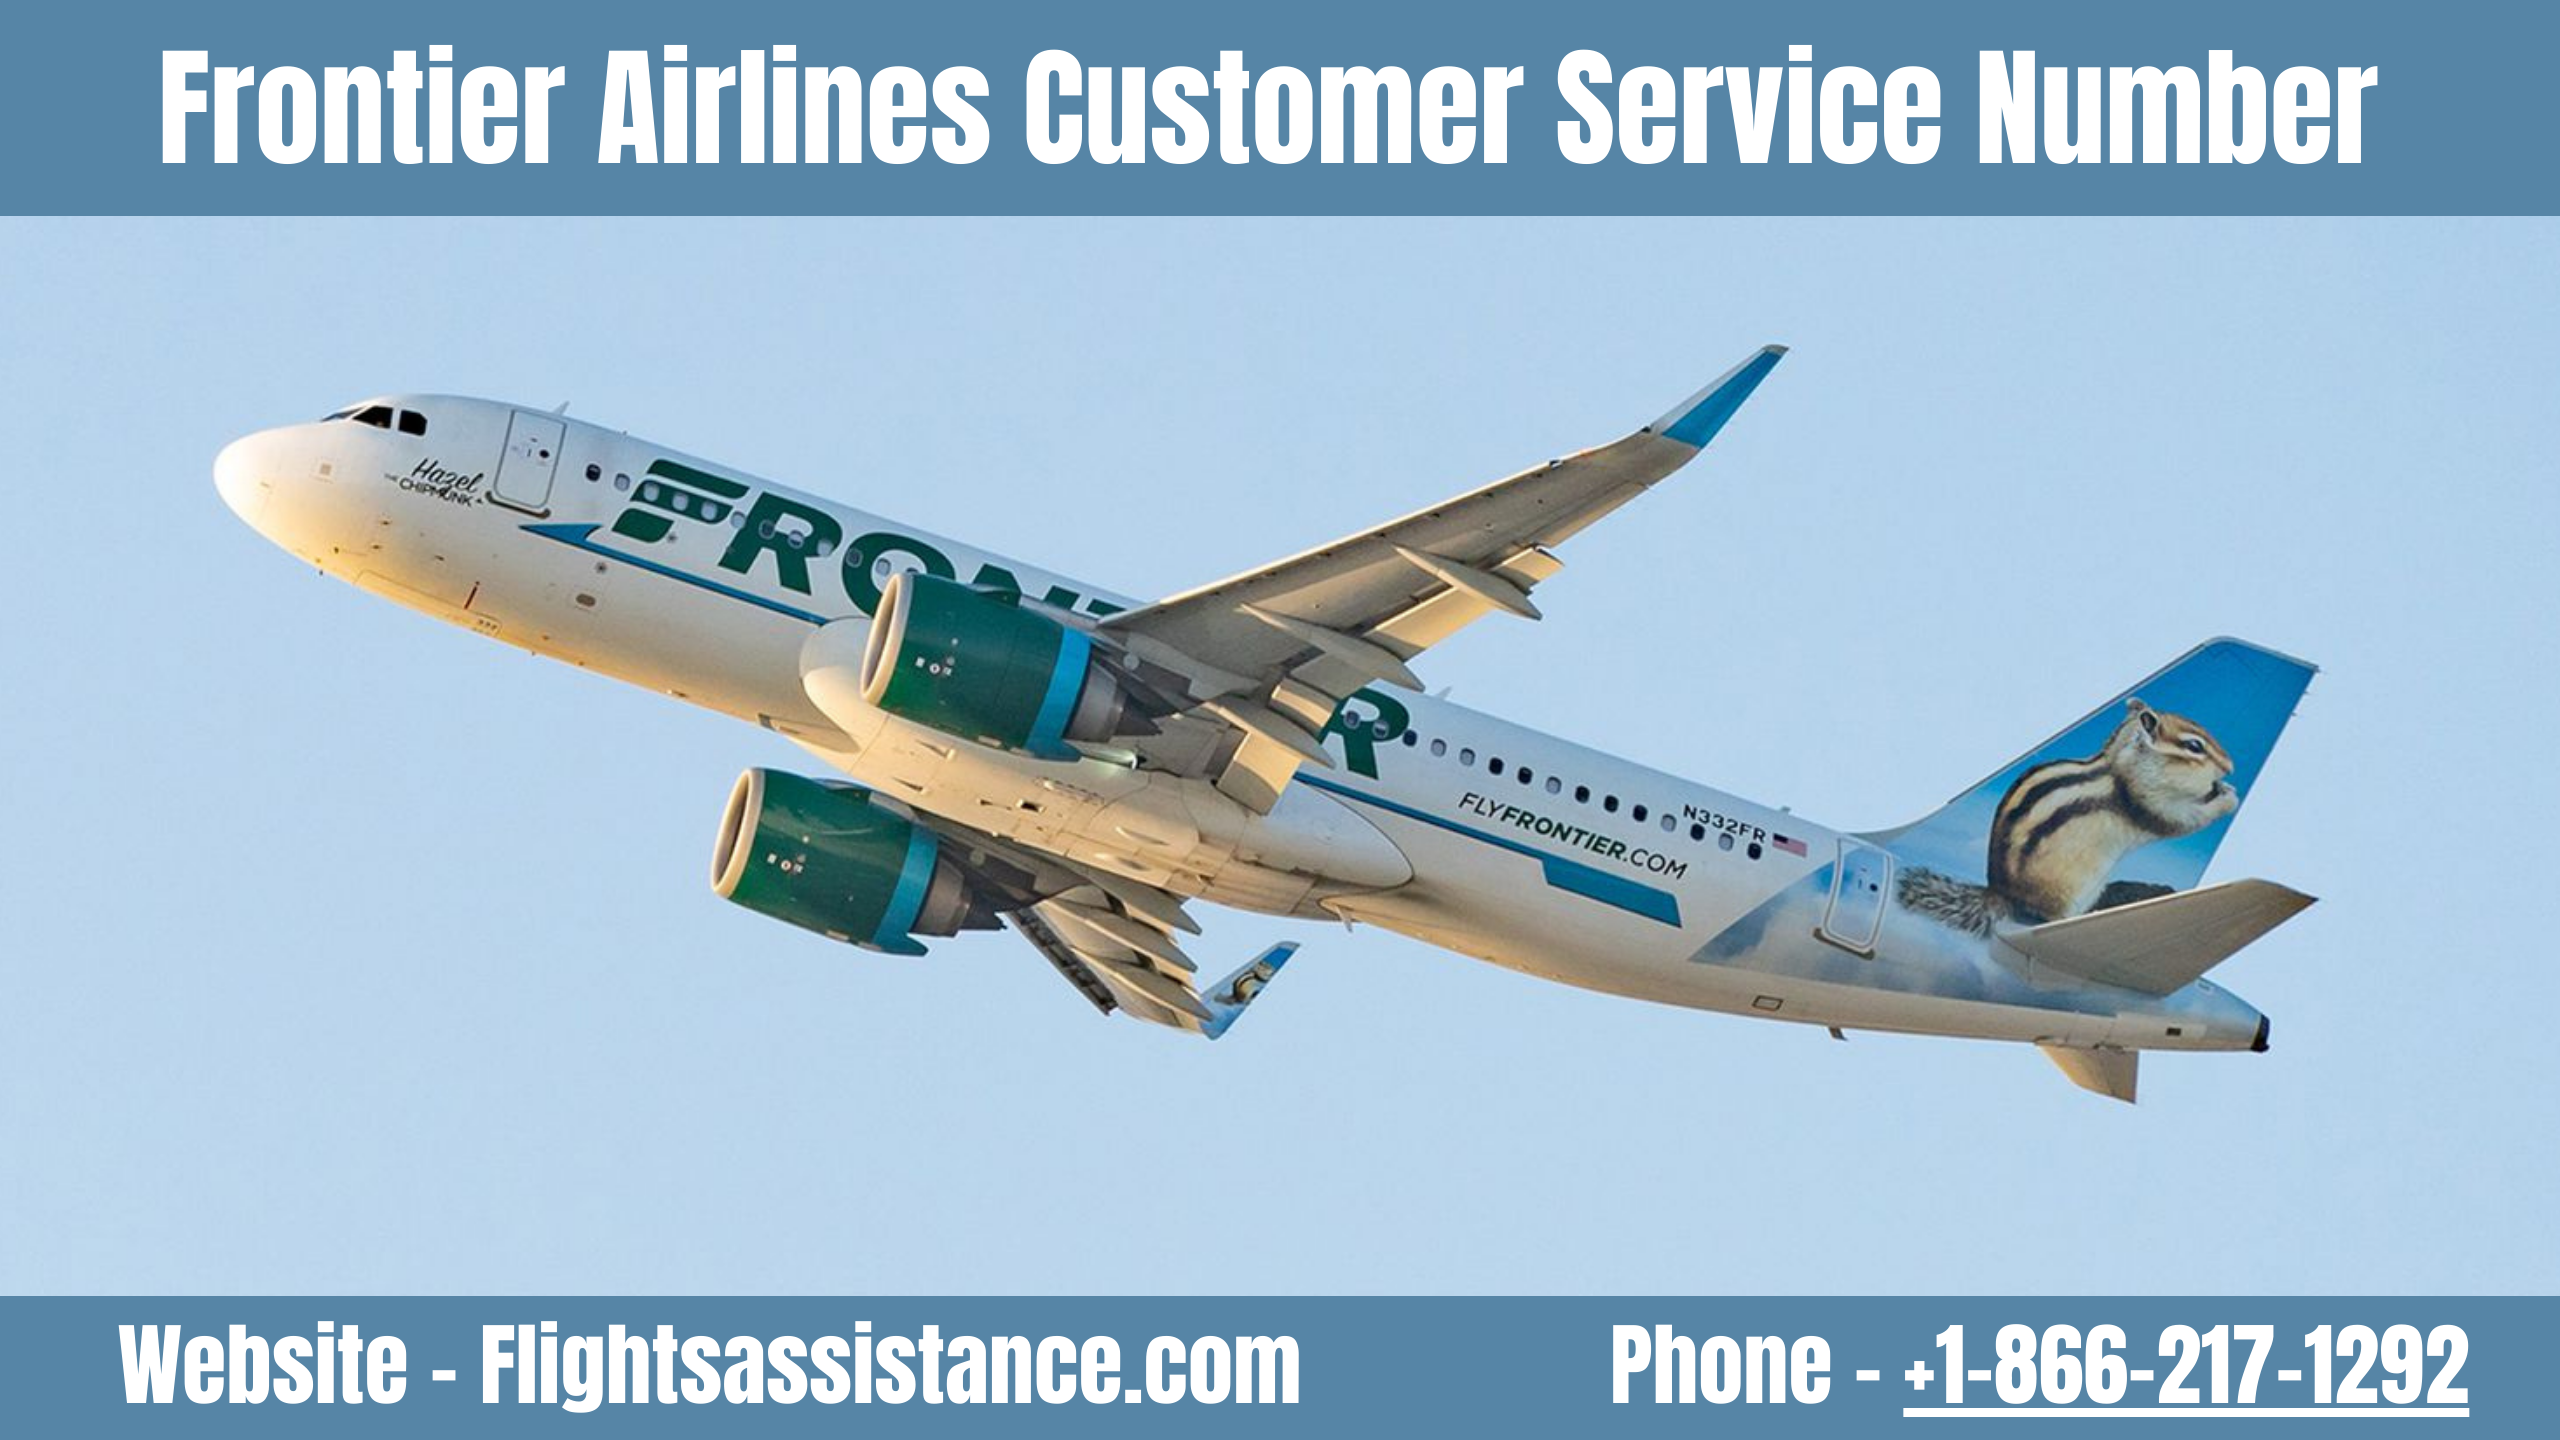 Frontier Airlines Customer Service Number: +1-866-217-1292